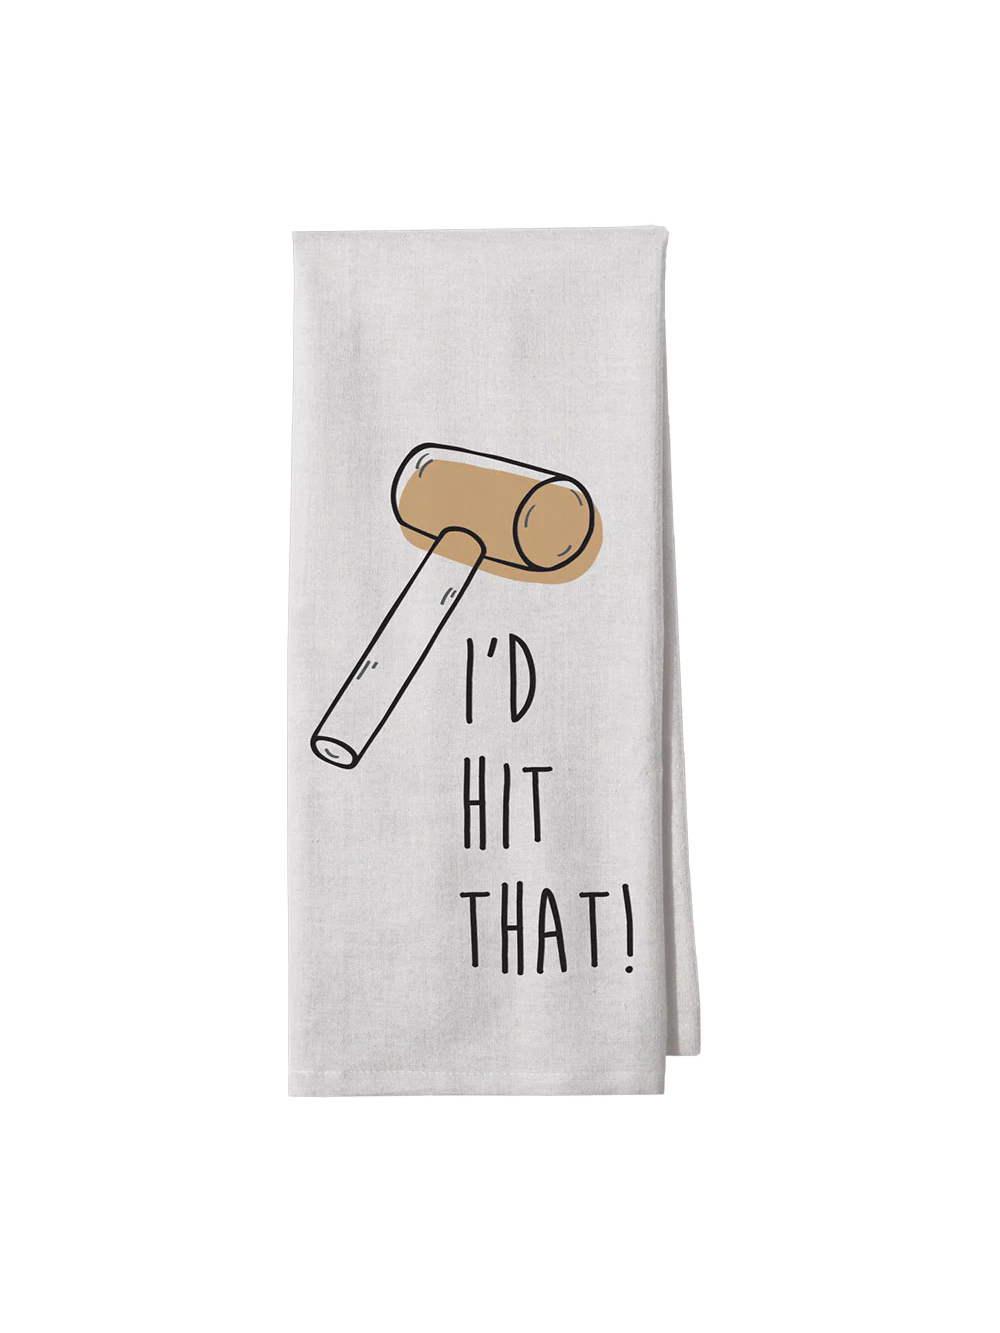 'I'd hit that' Maryland Kitchen Towel